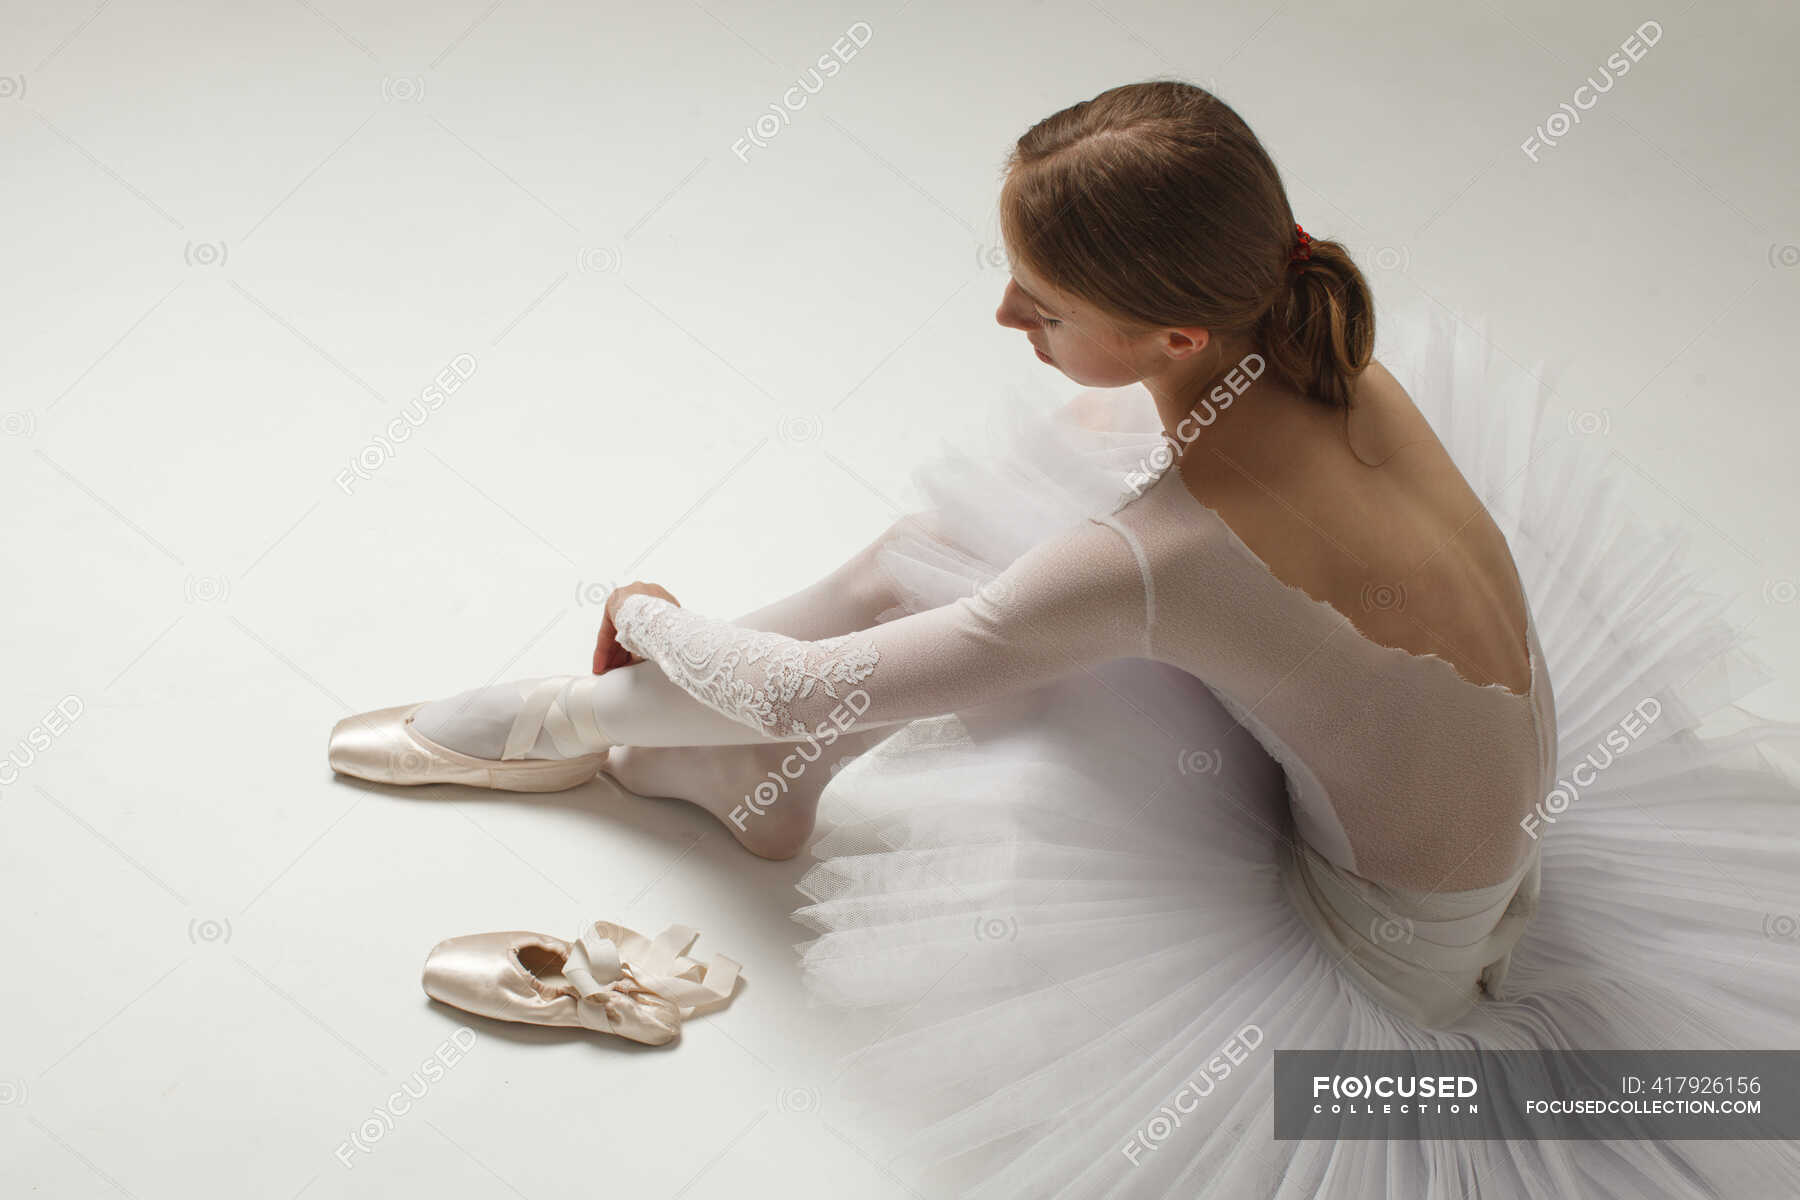 Young ballerina in white ballet dress Putting On Ballet Shoes, sitting on white — beauty, elegance - Stock Photo | #417926156